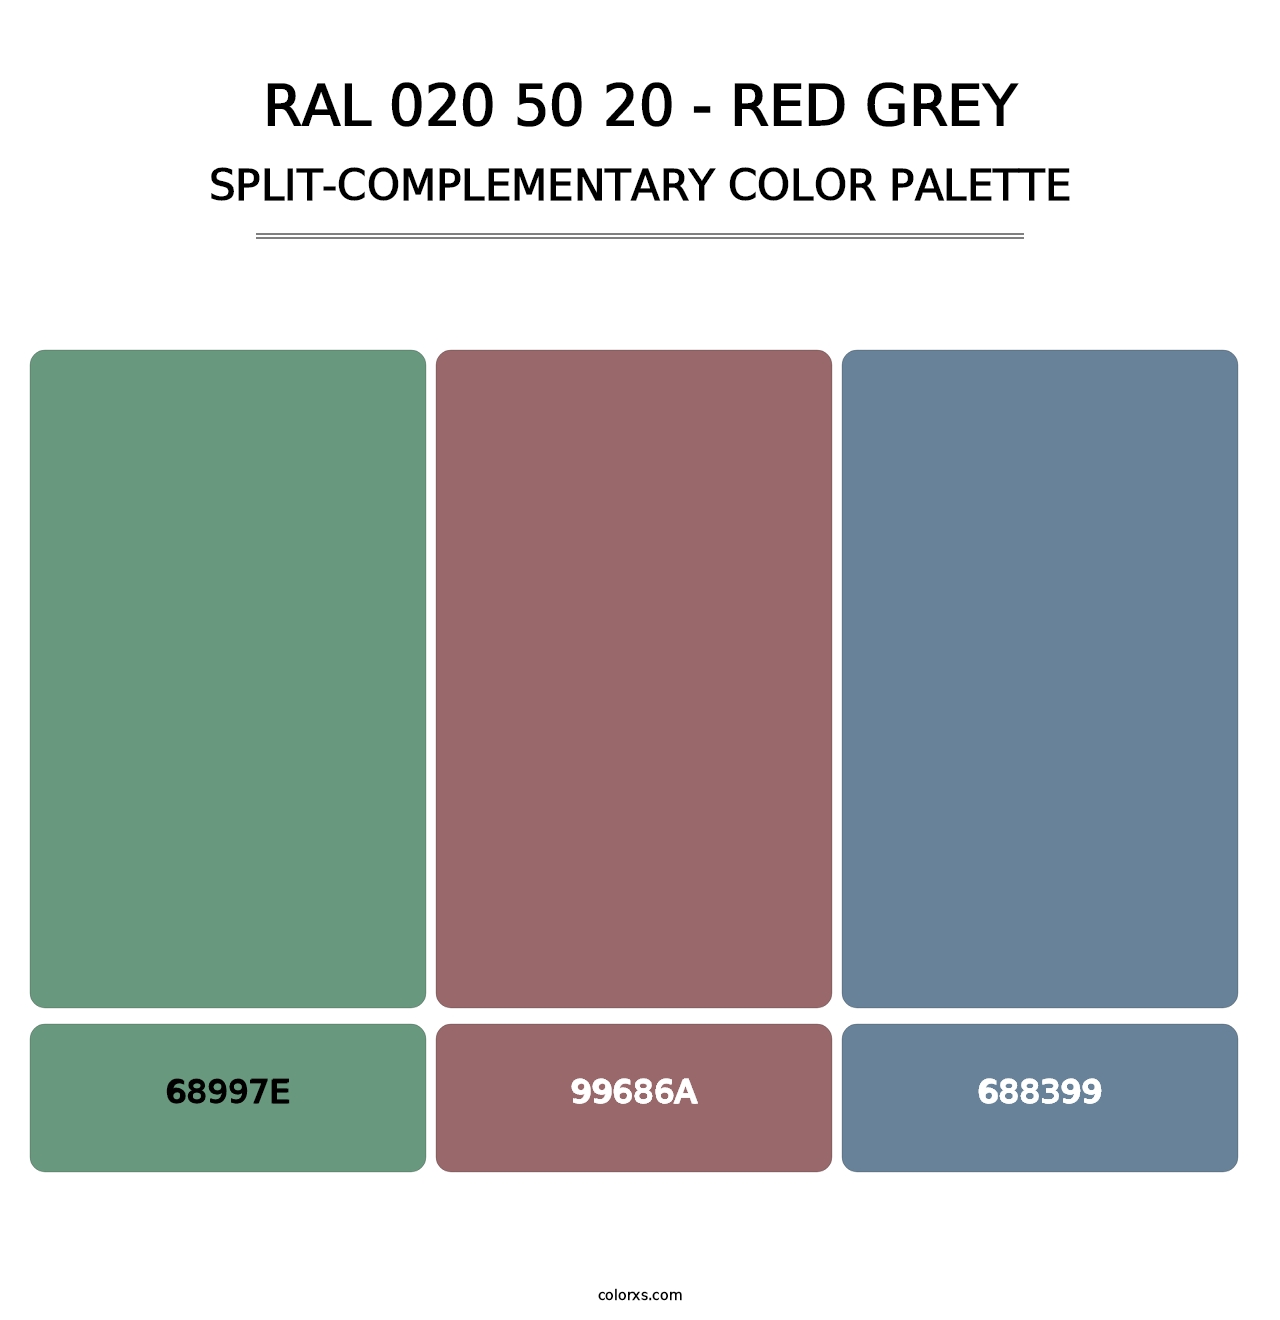 RAL 020 50 20 - Red Grey - Split-Complementary Color Palette